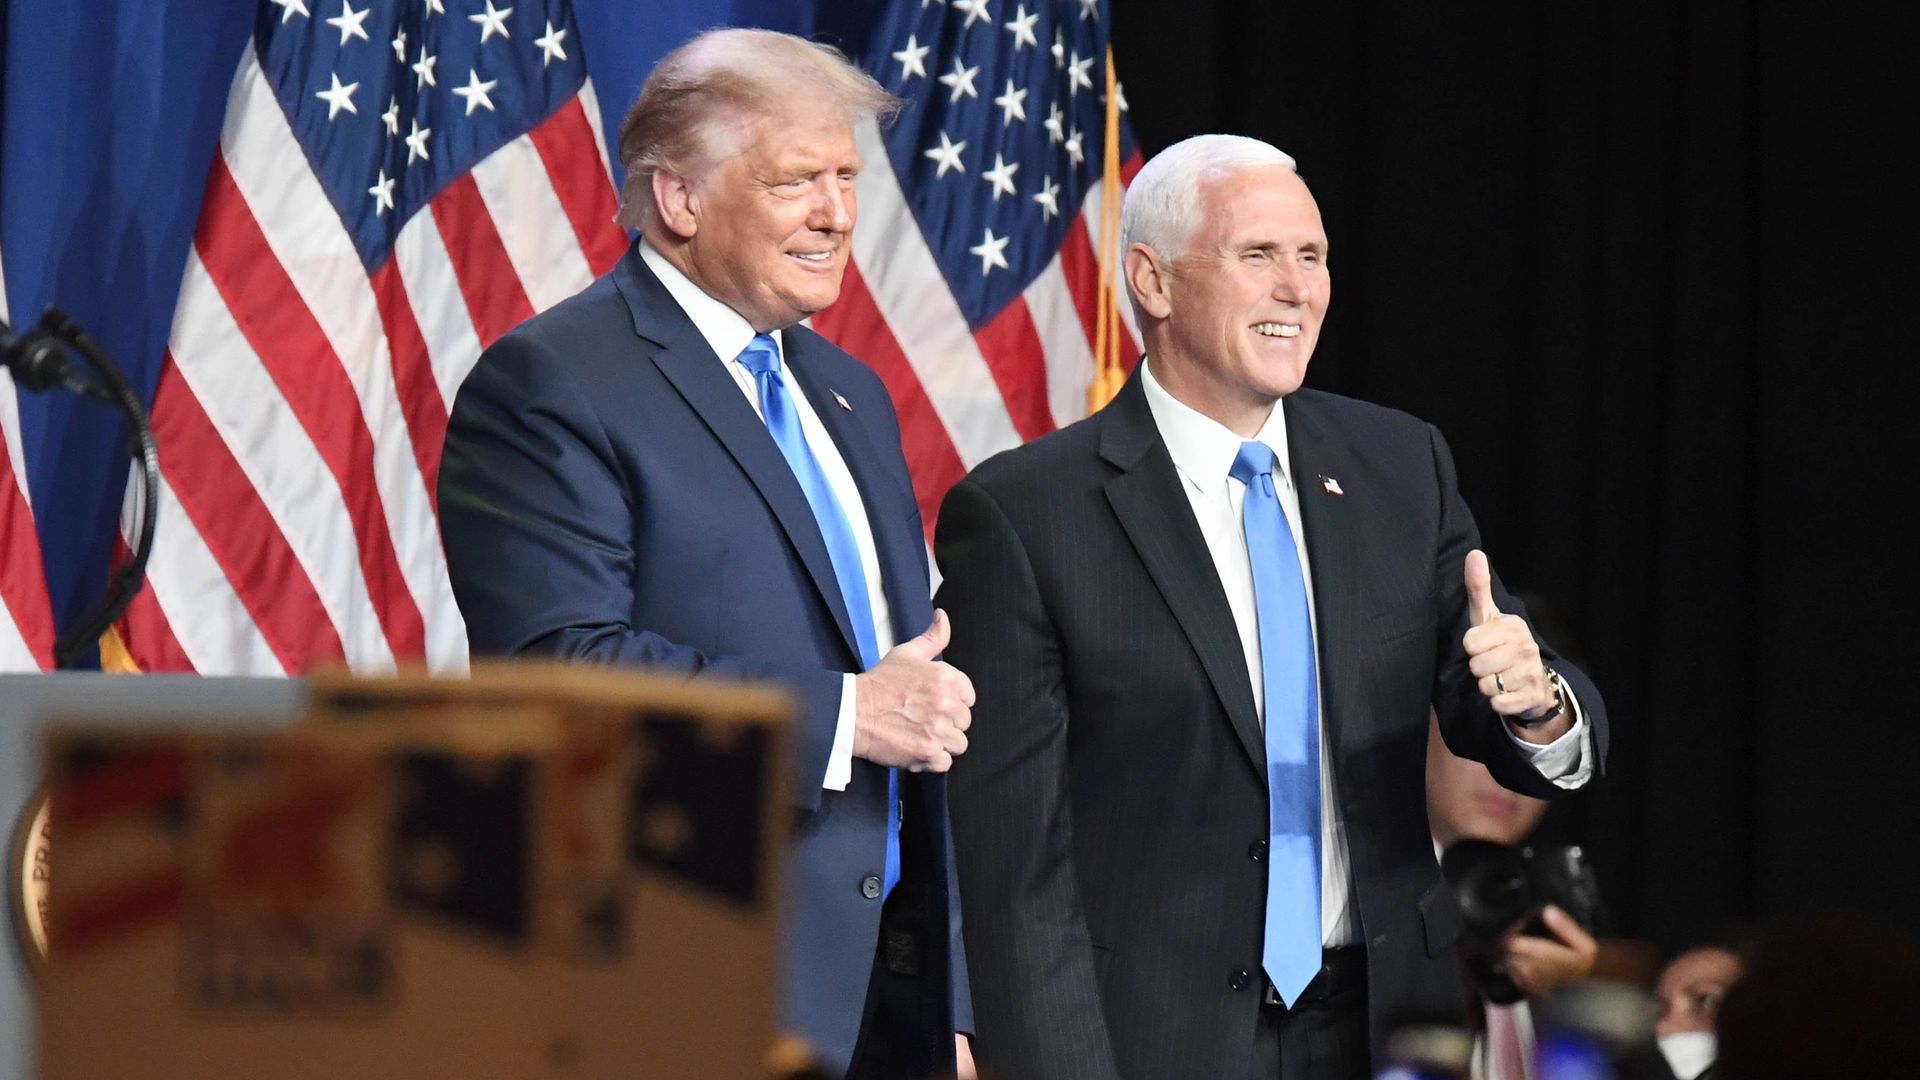 President Trump and Vice President Mike Pence smile and give thumbs up at the Republican convention